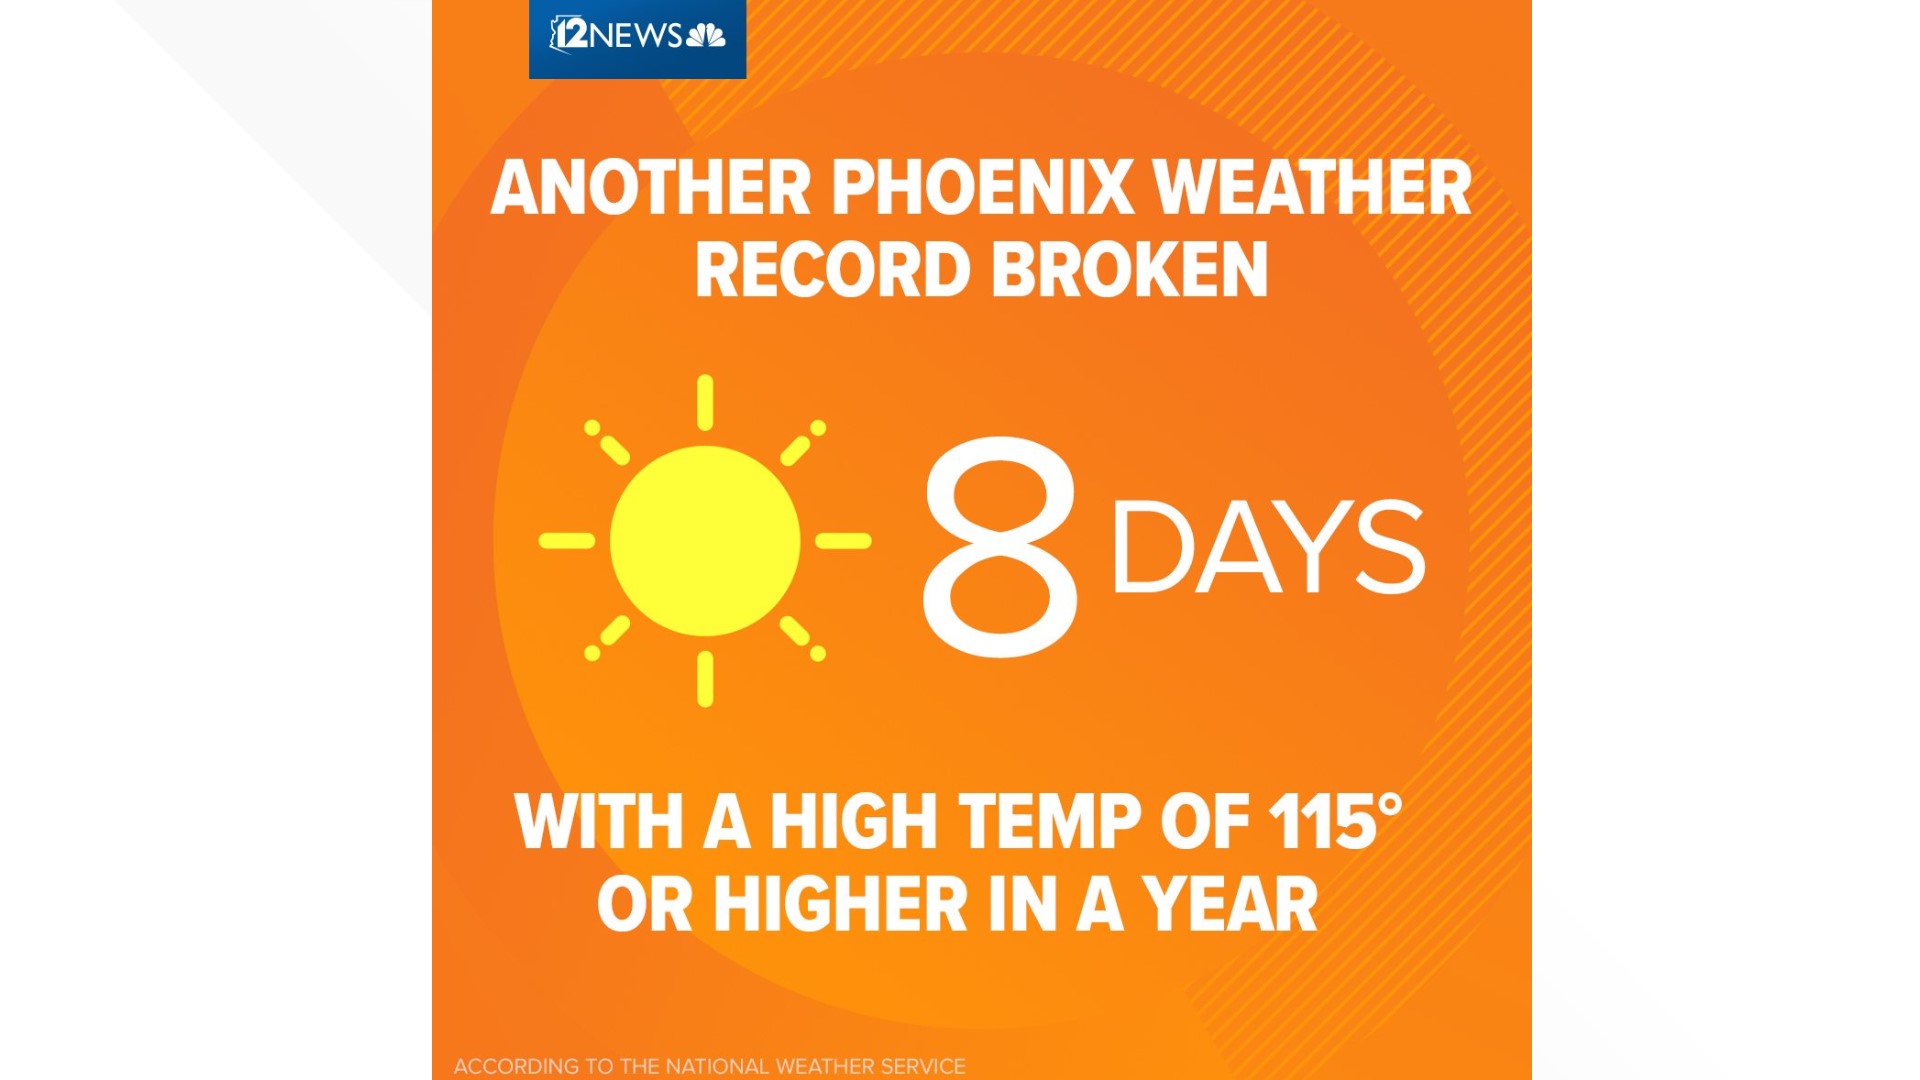 We have had more 115 degree days than ever before in Phoenix history!